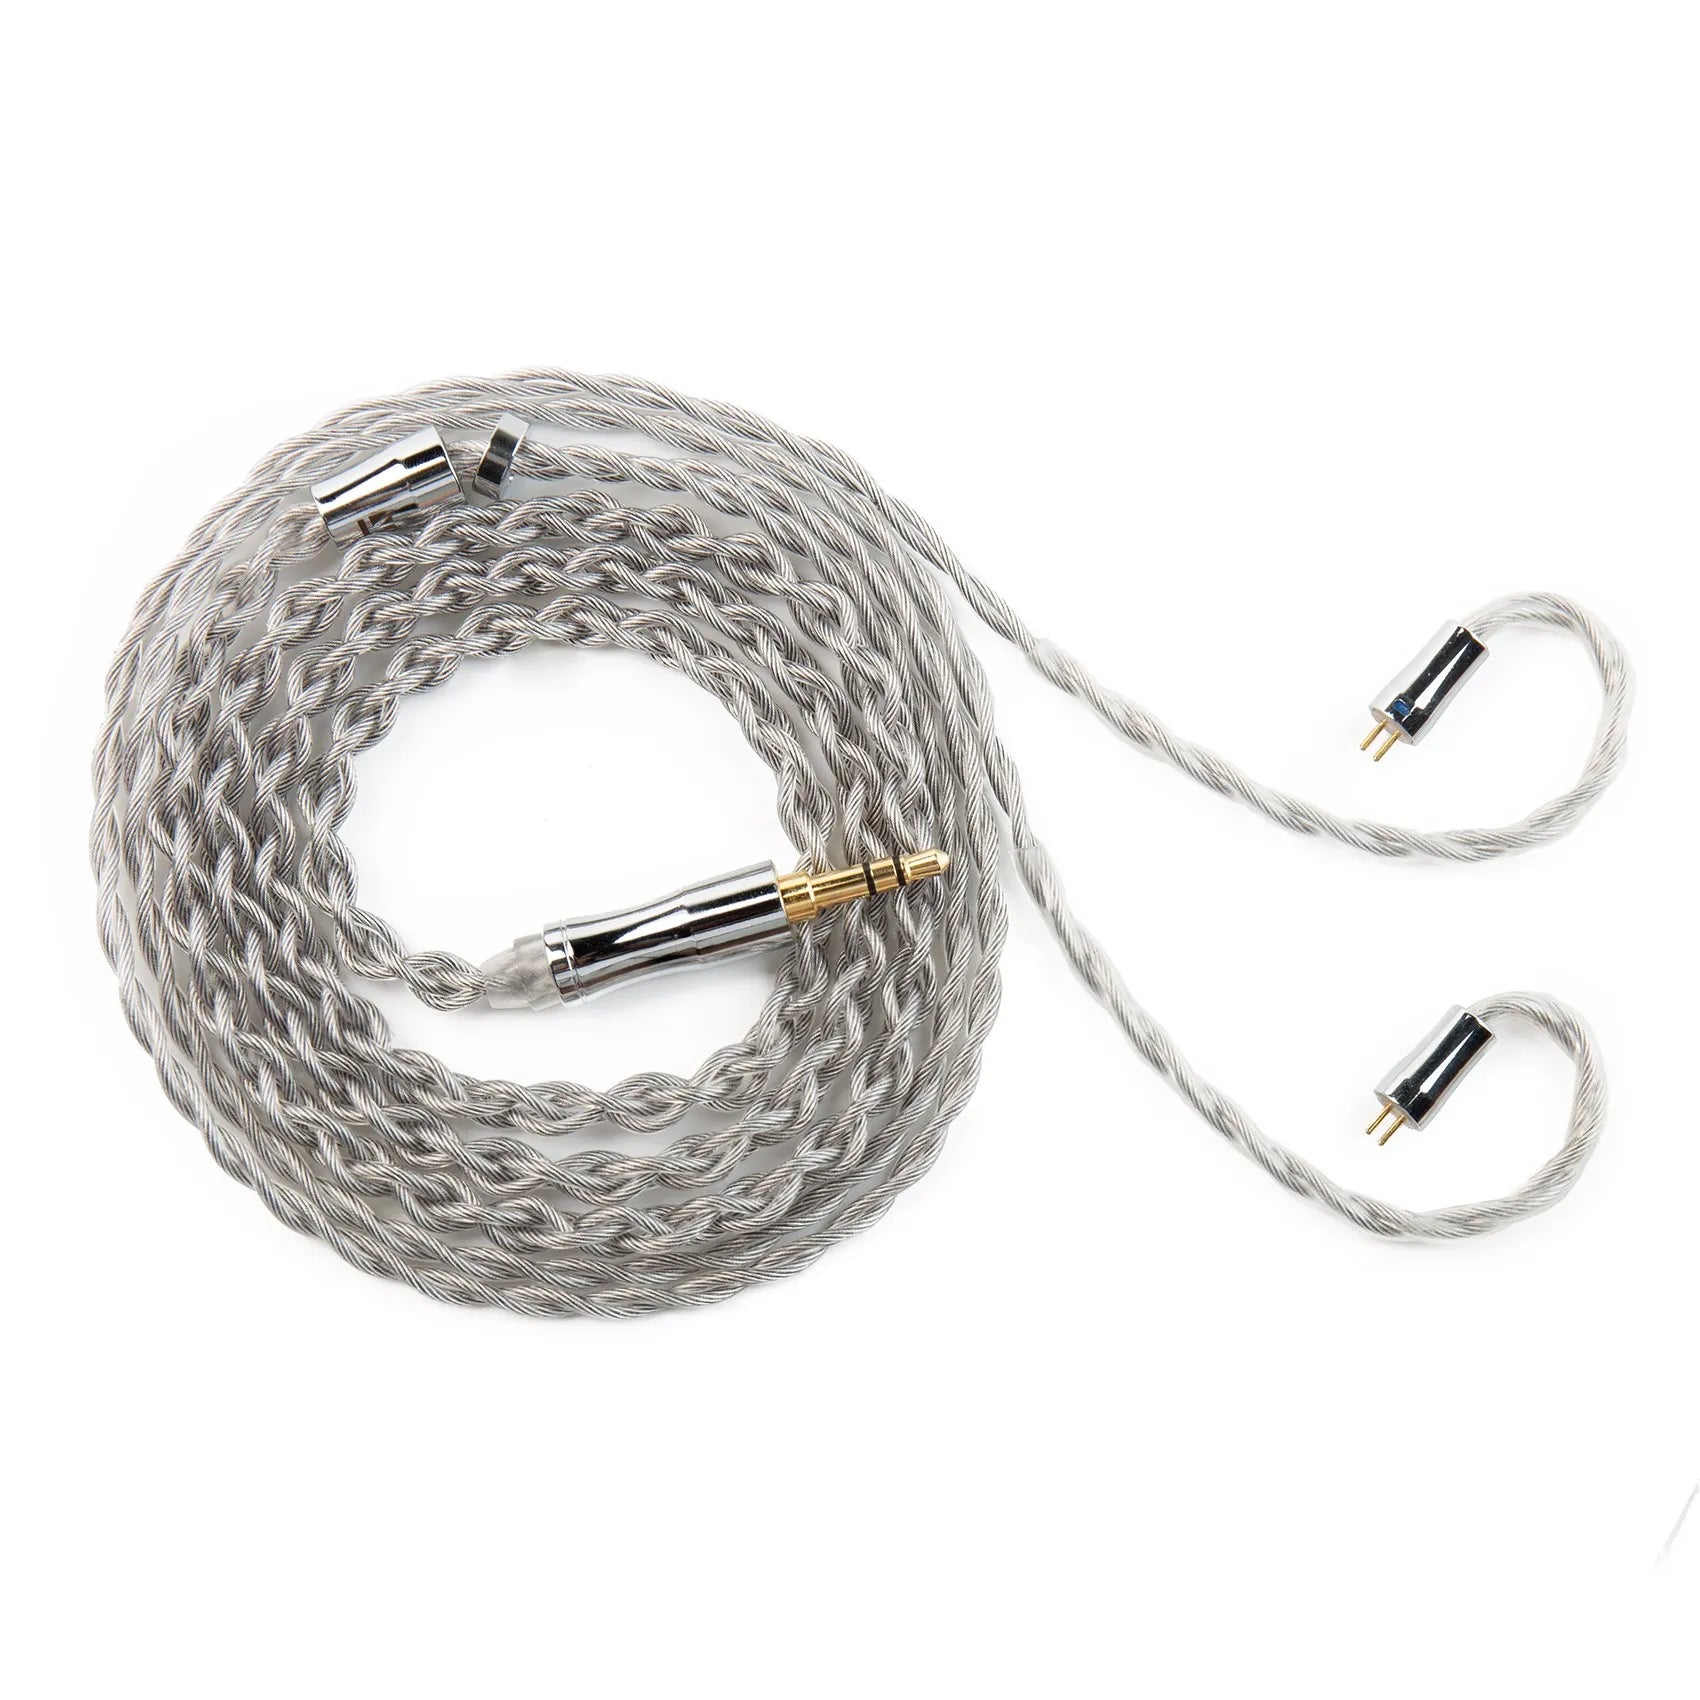 KBEAR Chord 6N Graphene+4N OFC Silver-plated Mixedly Braided Upgrade Cable - The HiFi Cat